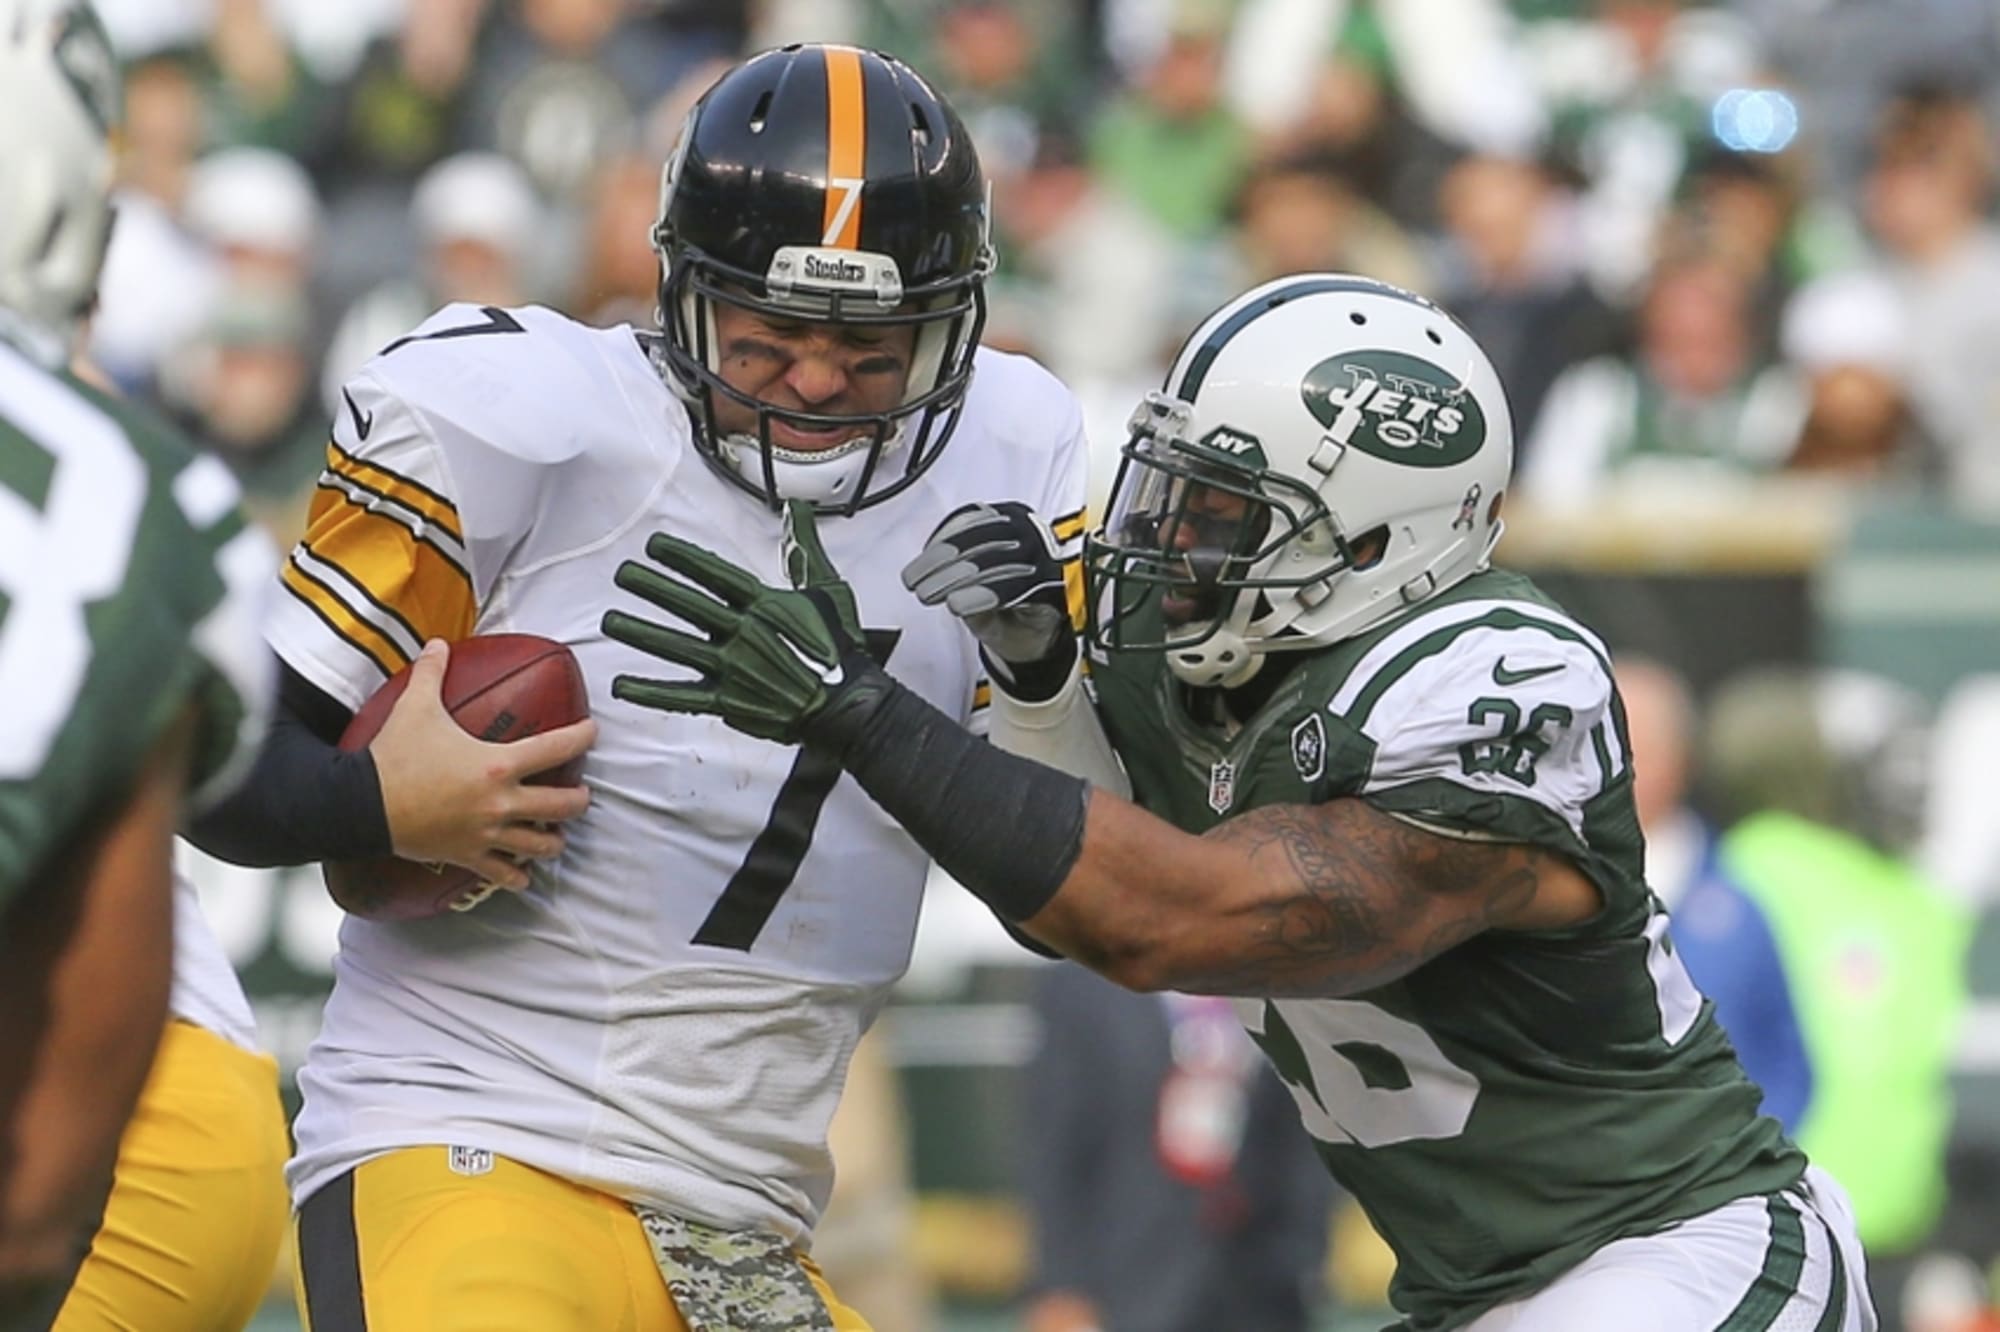 New York Jets at Pittsburgh Steelers Live Stream Watch NFL Online